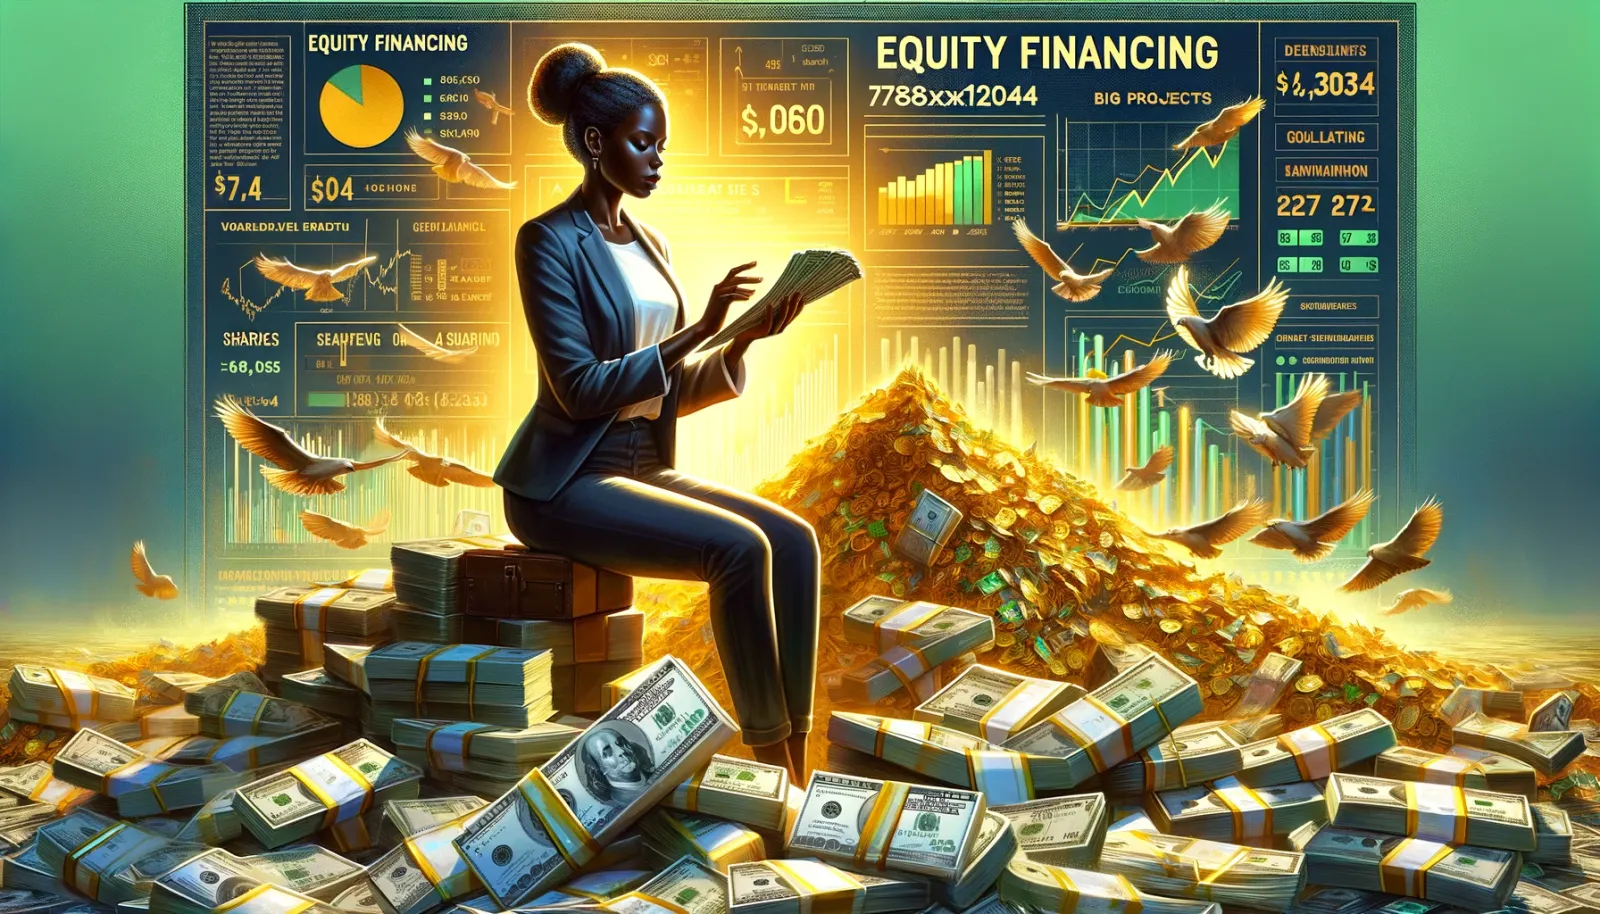 Equity Financing: Finance Explained